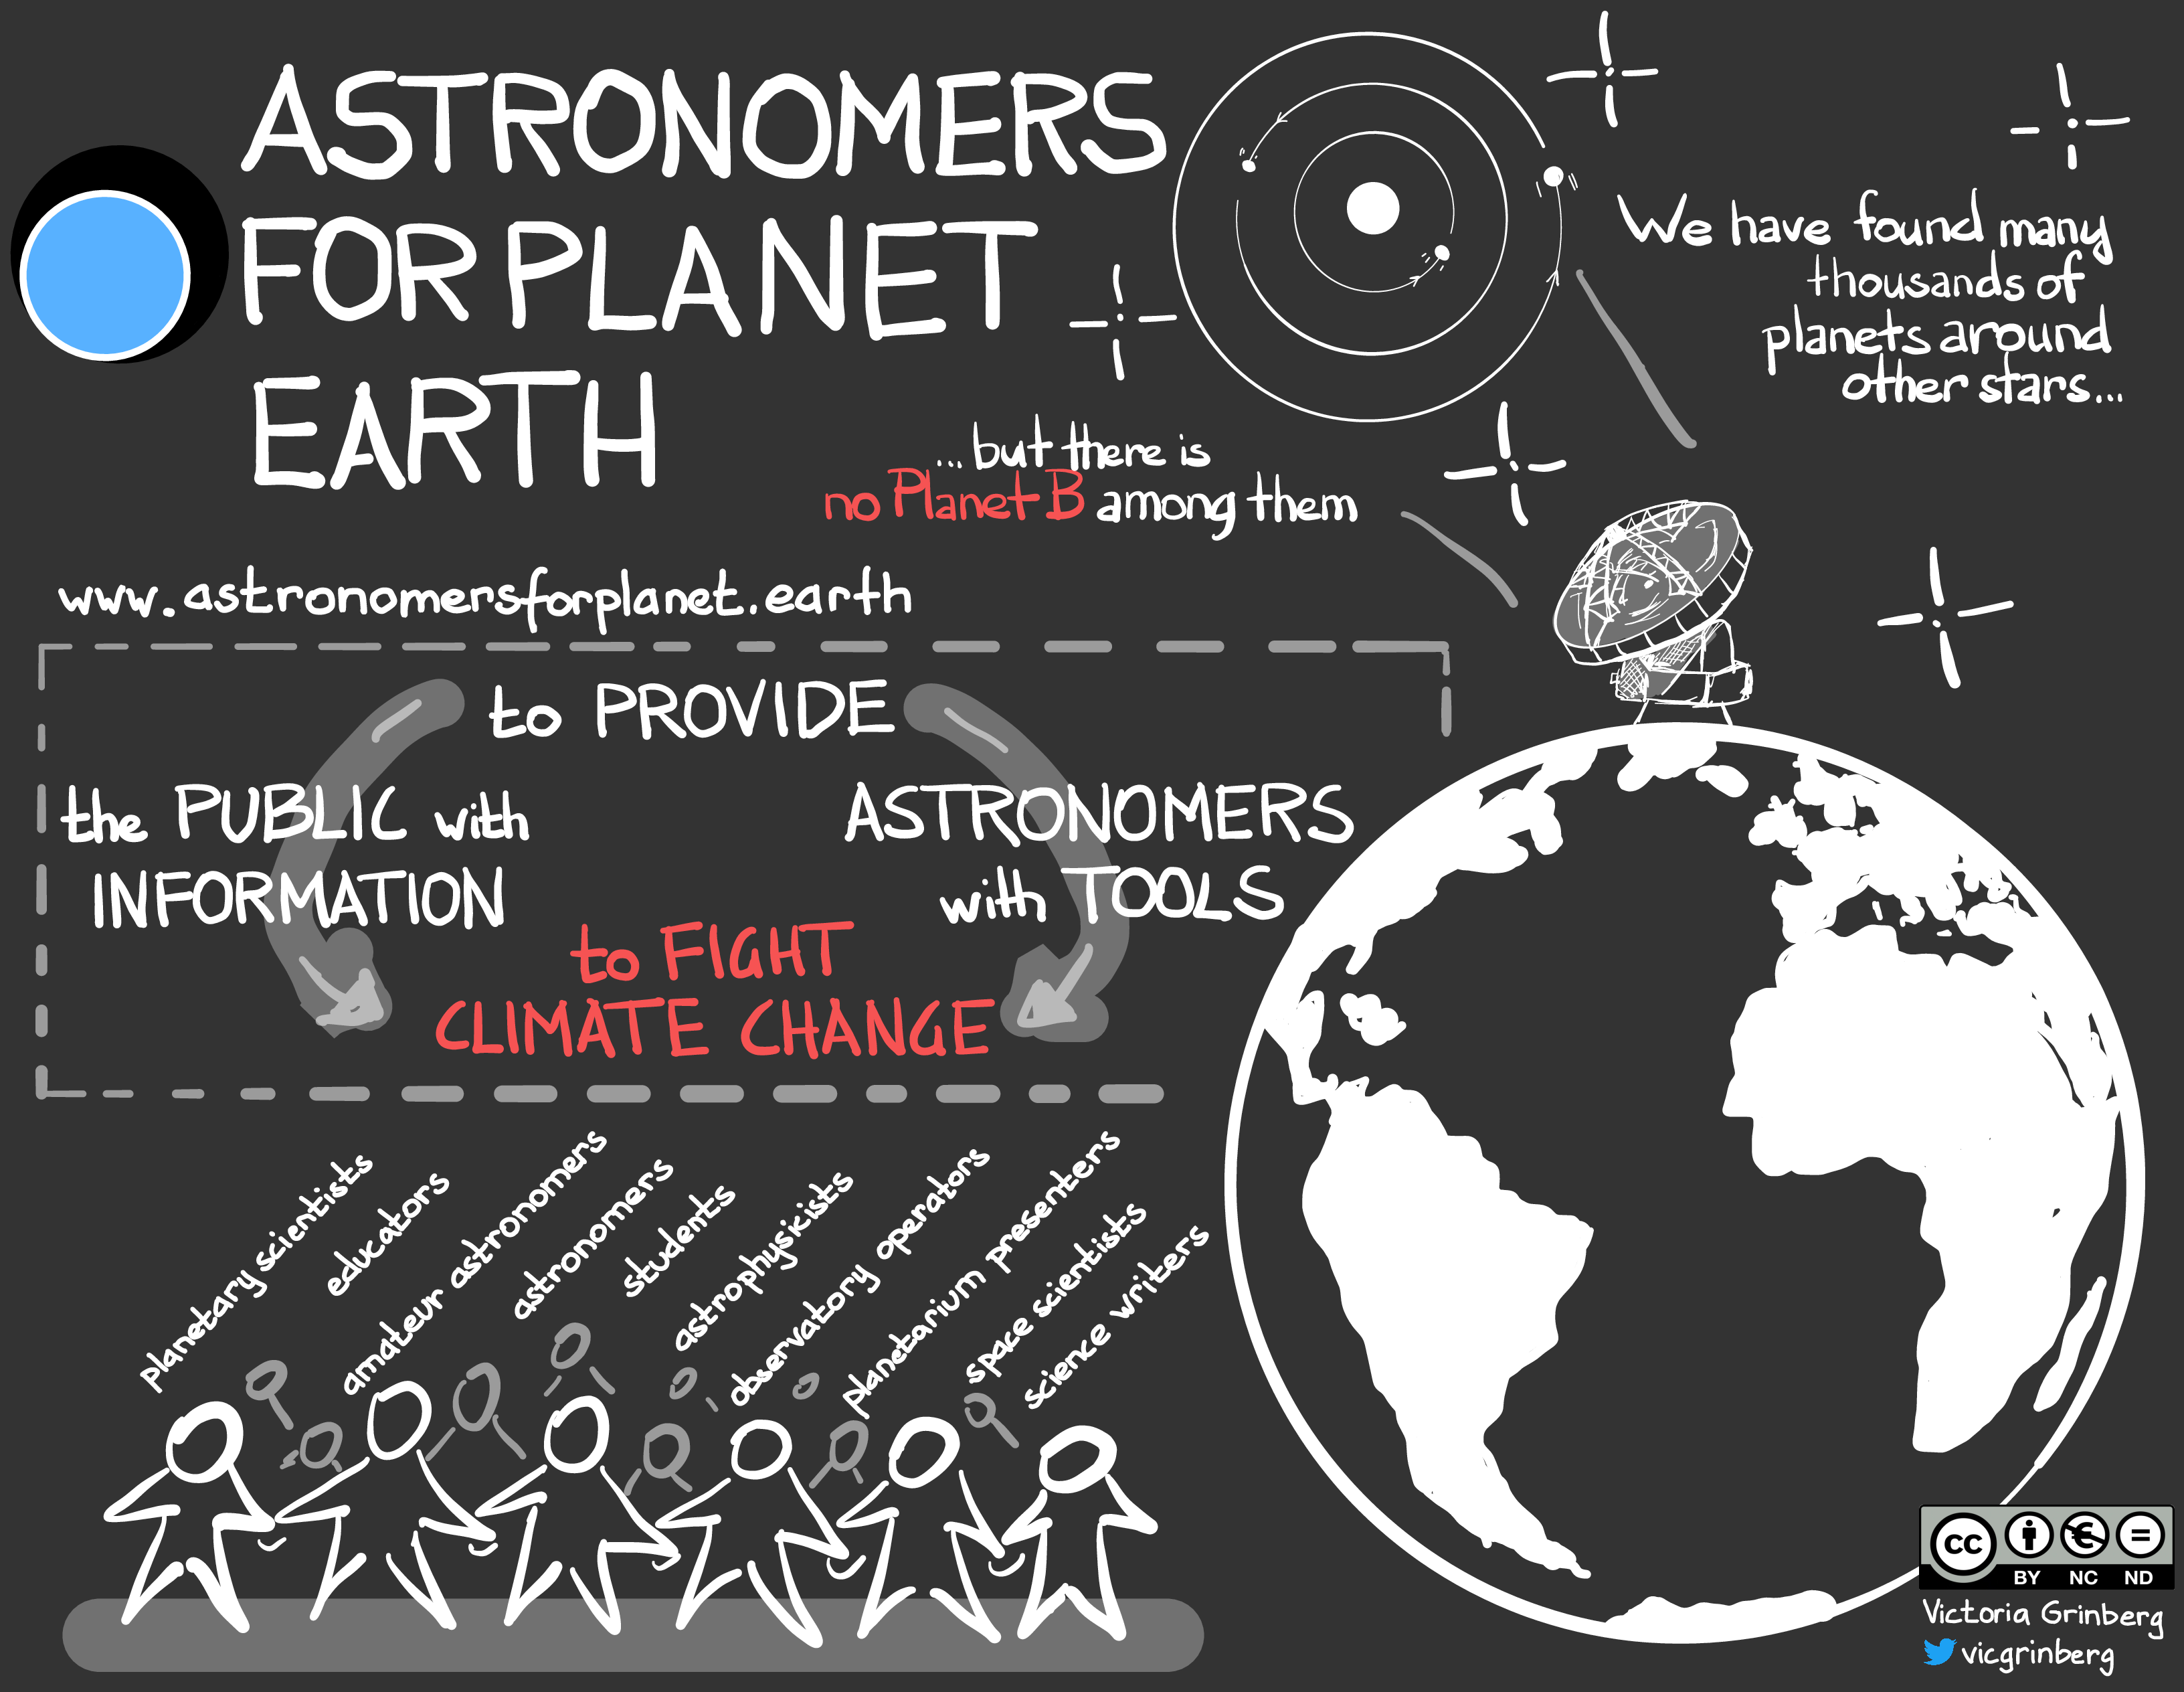 Left: Title 'Astronomers for Planet Earth'; below that a small flow-diagrams for the sentence 'to provide the public with information & astronomers with tools to fight climate change' and below that a sketch of a group of people, holding hands and above them a list of our different members 'planetary scientists, educators, amateur astronomers, students, astrophysicists, observatory operators, planetarium presenters, space scientists, science writers' Right: Sketch of Earth with a telescope on it, looking towards a different planetary system: 'We have found many thousands of planets around other stars ... but there is no Planet B among them'.